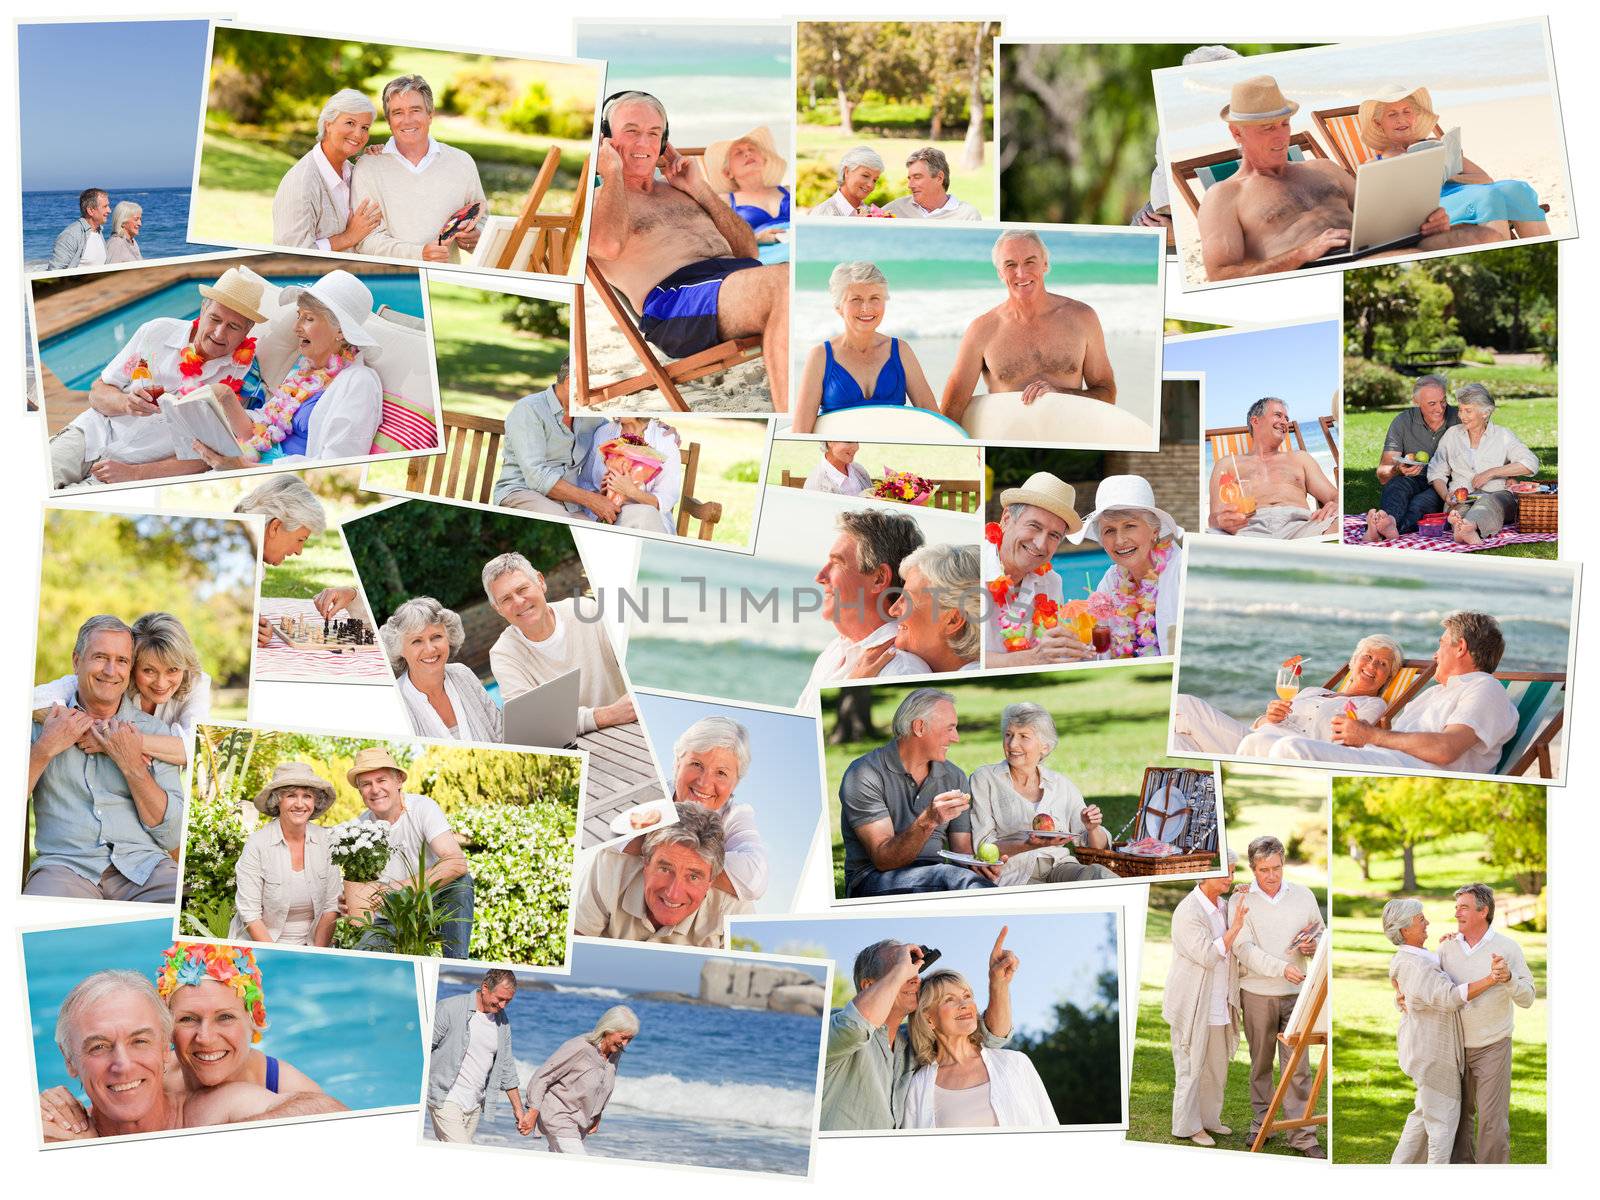 Collage of senior couples spending time together outdoors